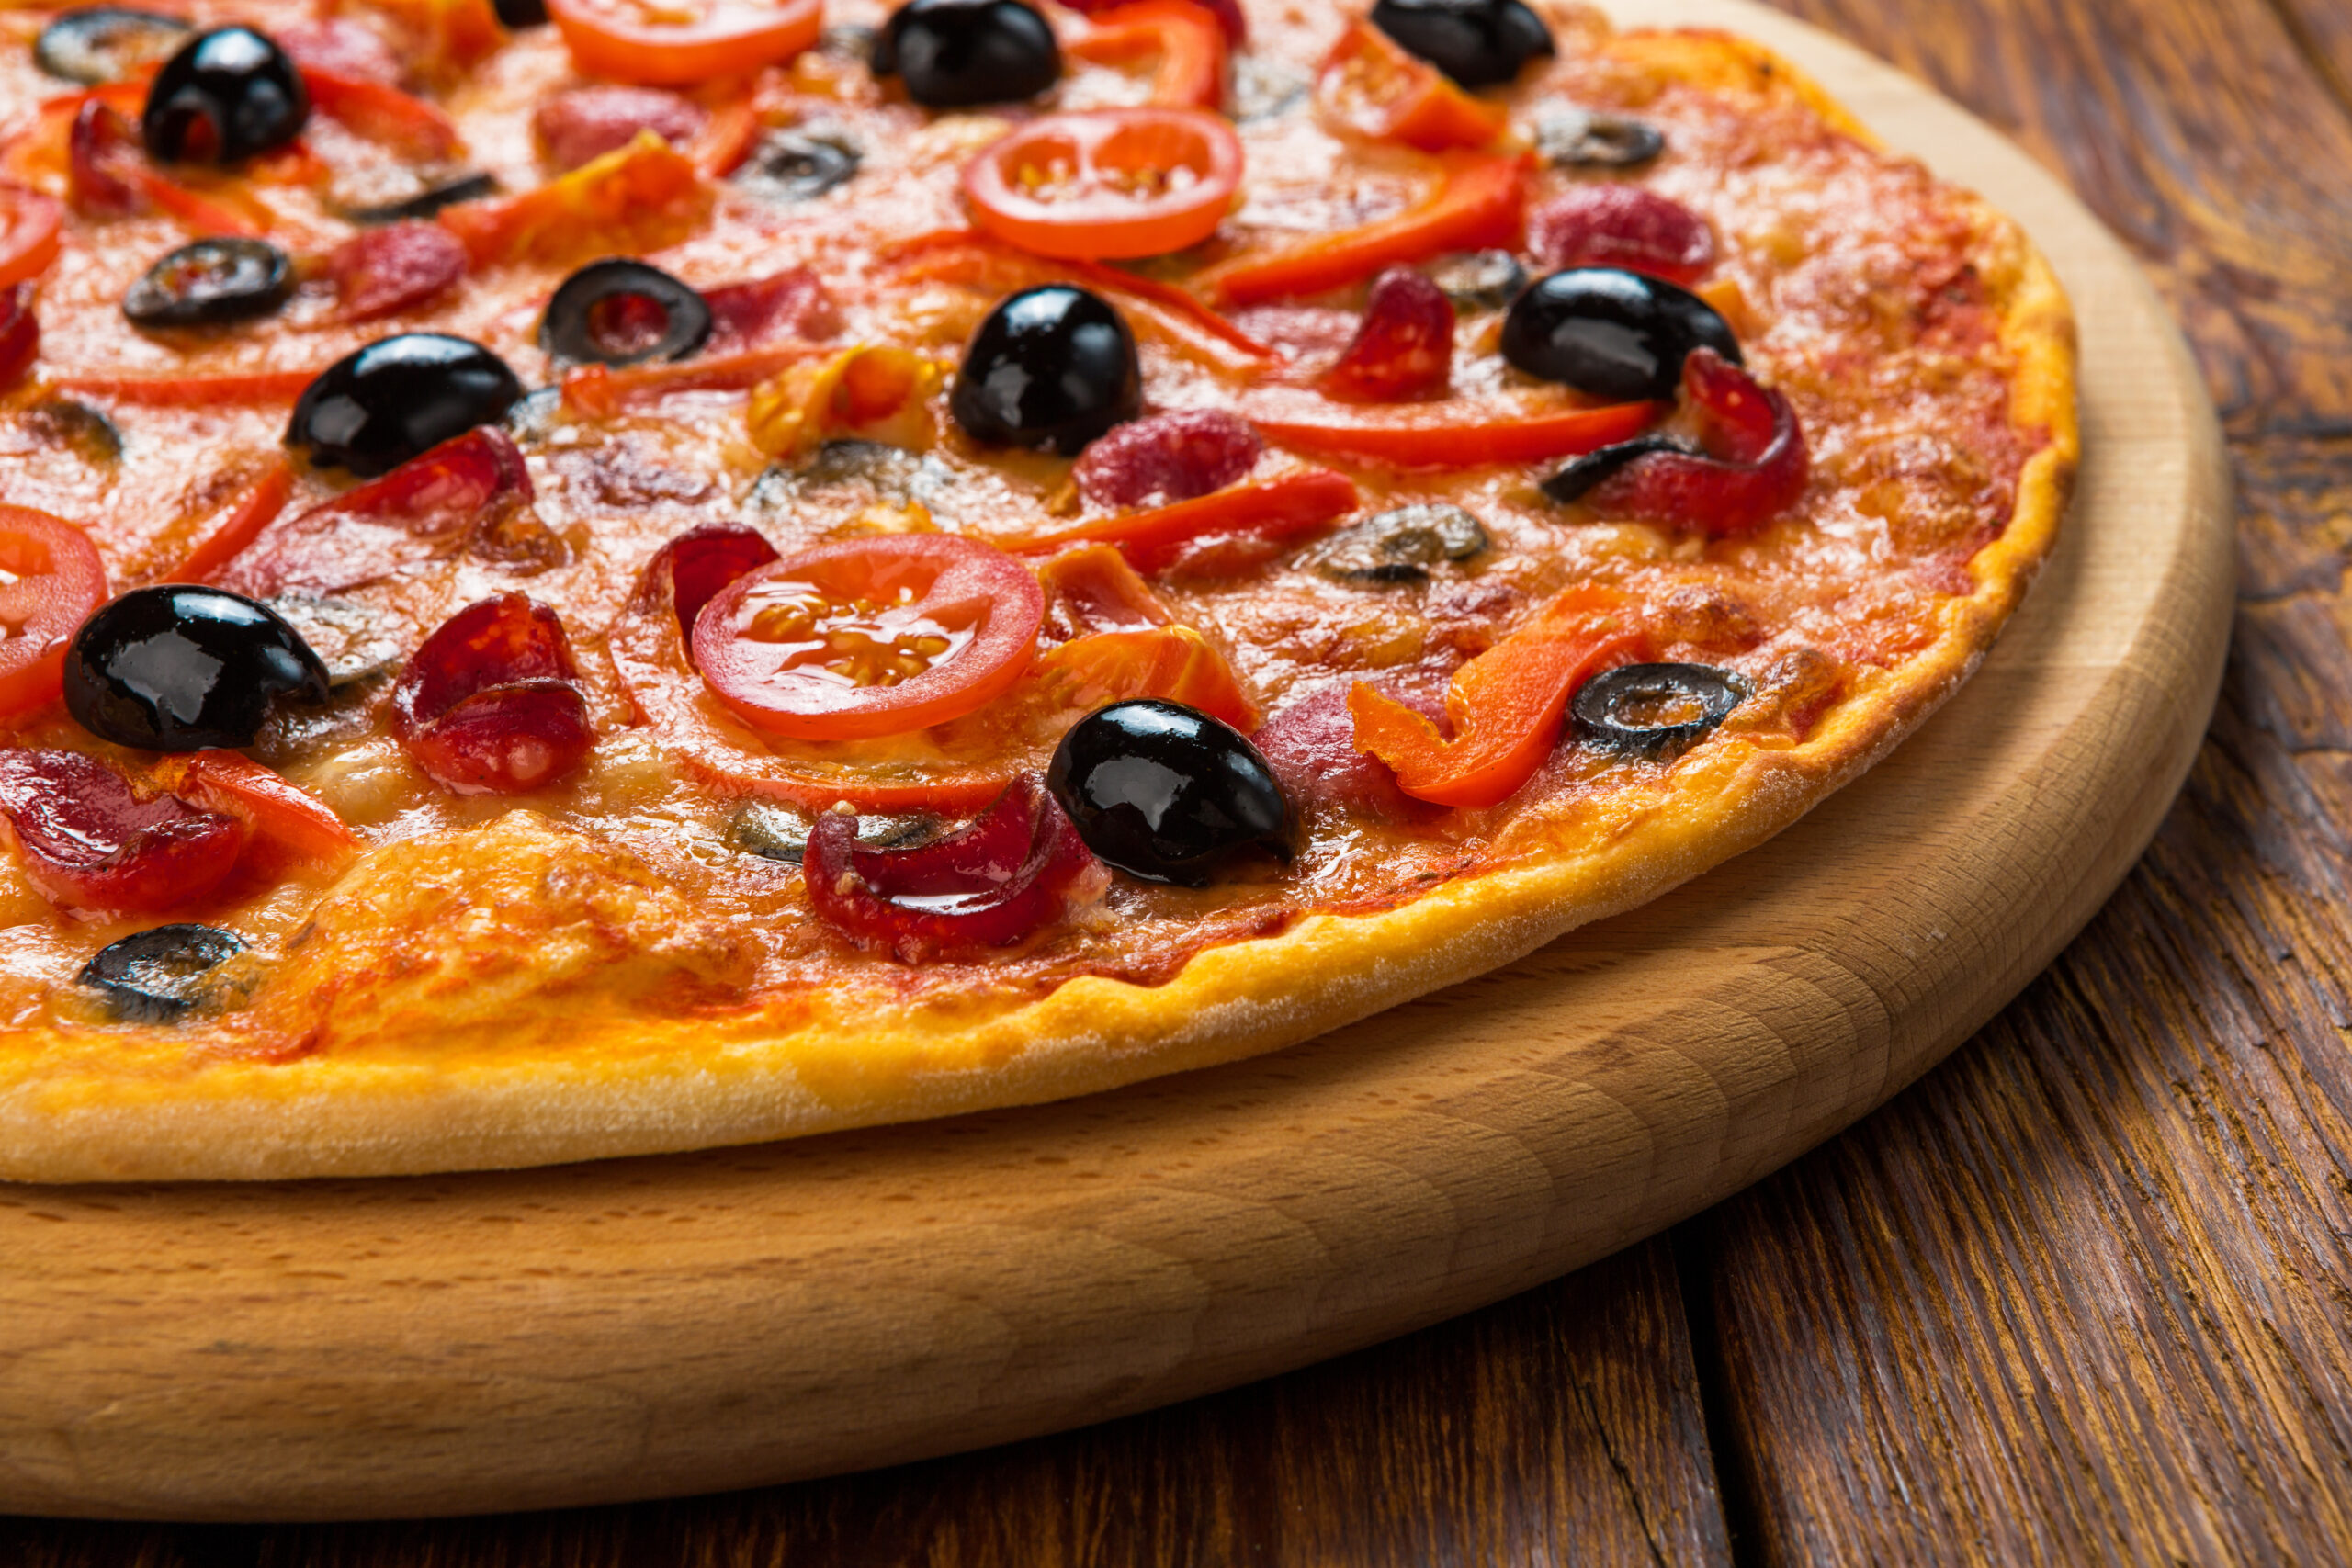 Delicious italian pizza with salami pepperoni, cherry tomatoes and black olives - thin pastry crust at wooden table background